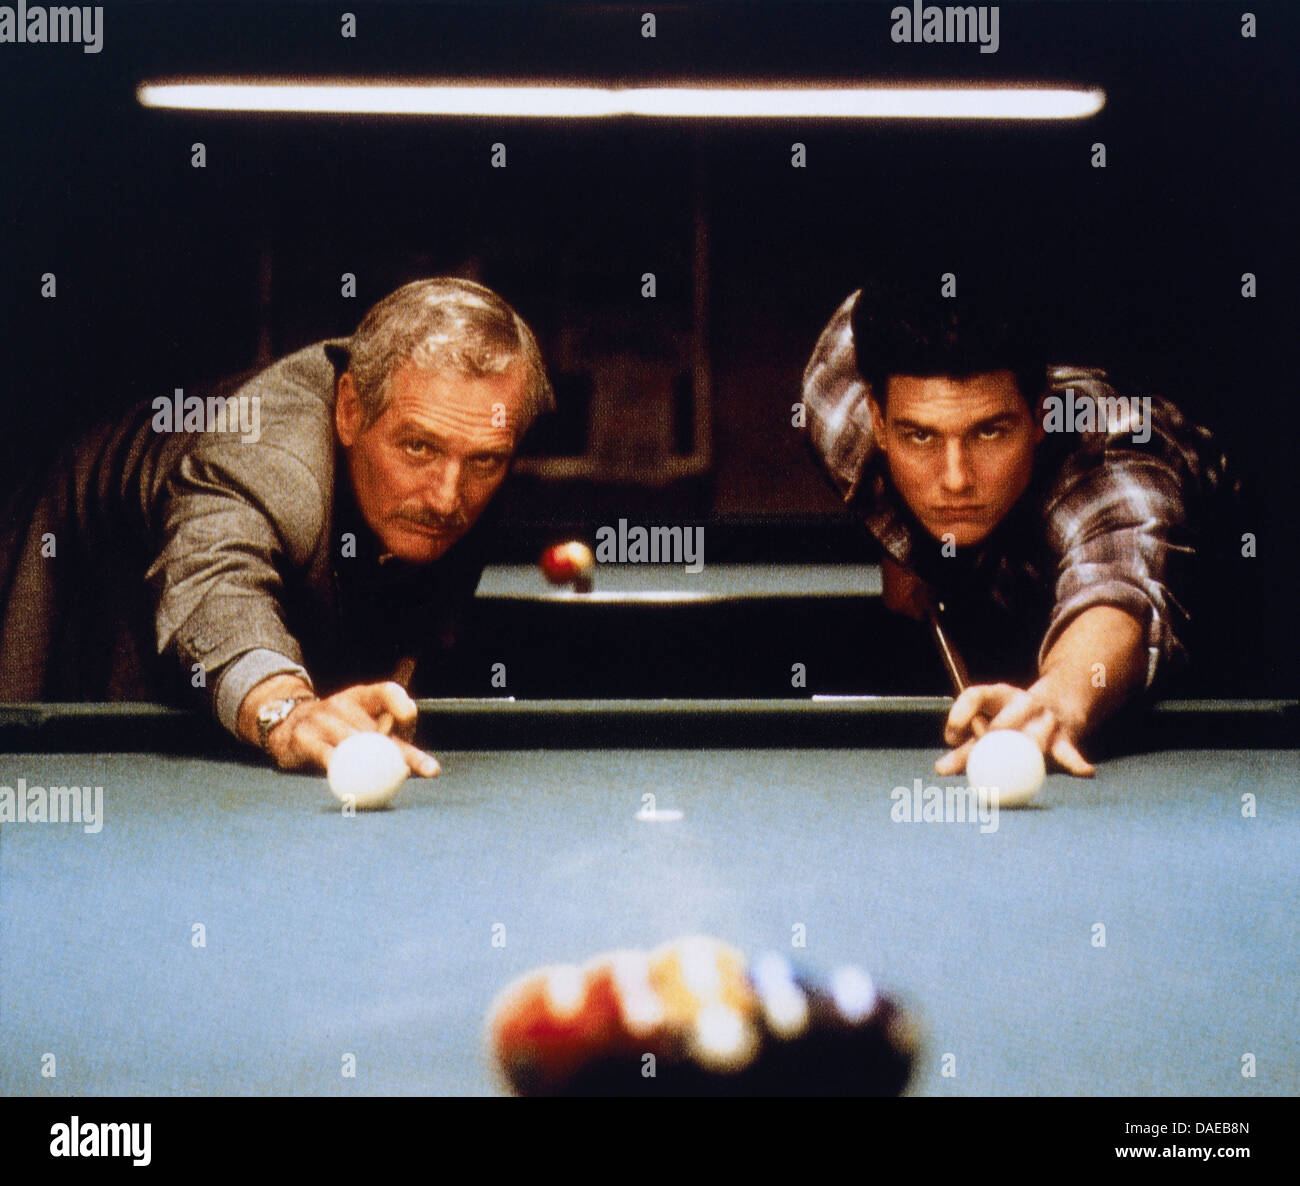 Paul Newman and Tom Cruise on-set of the Film, "The Color of Money", by  Touchstone